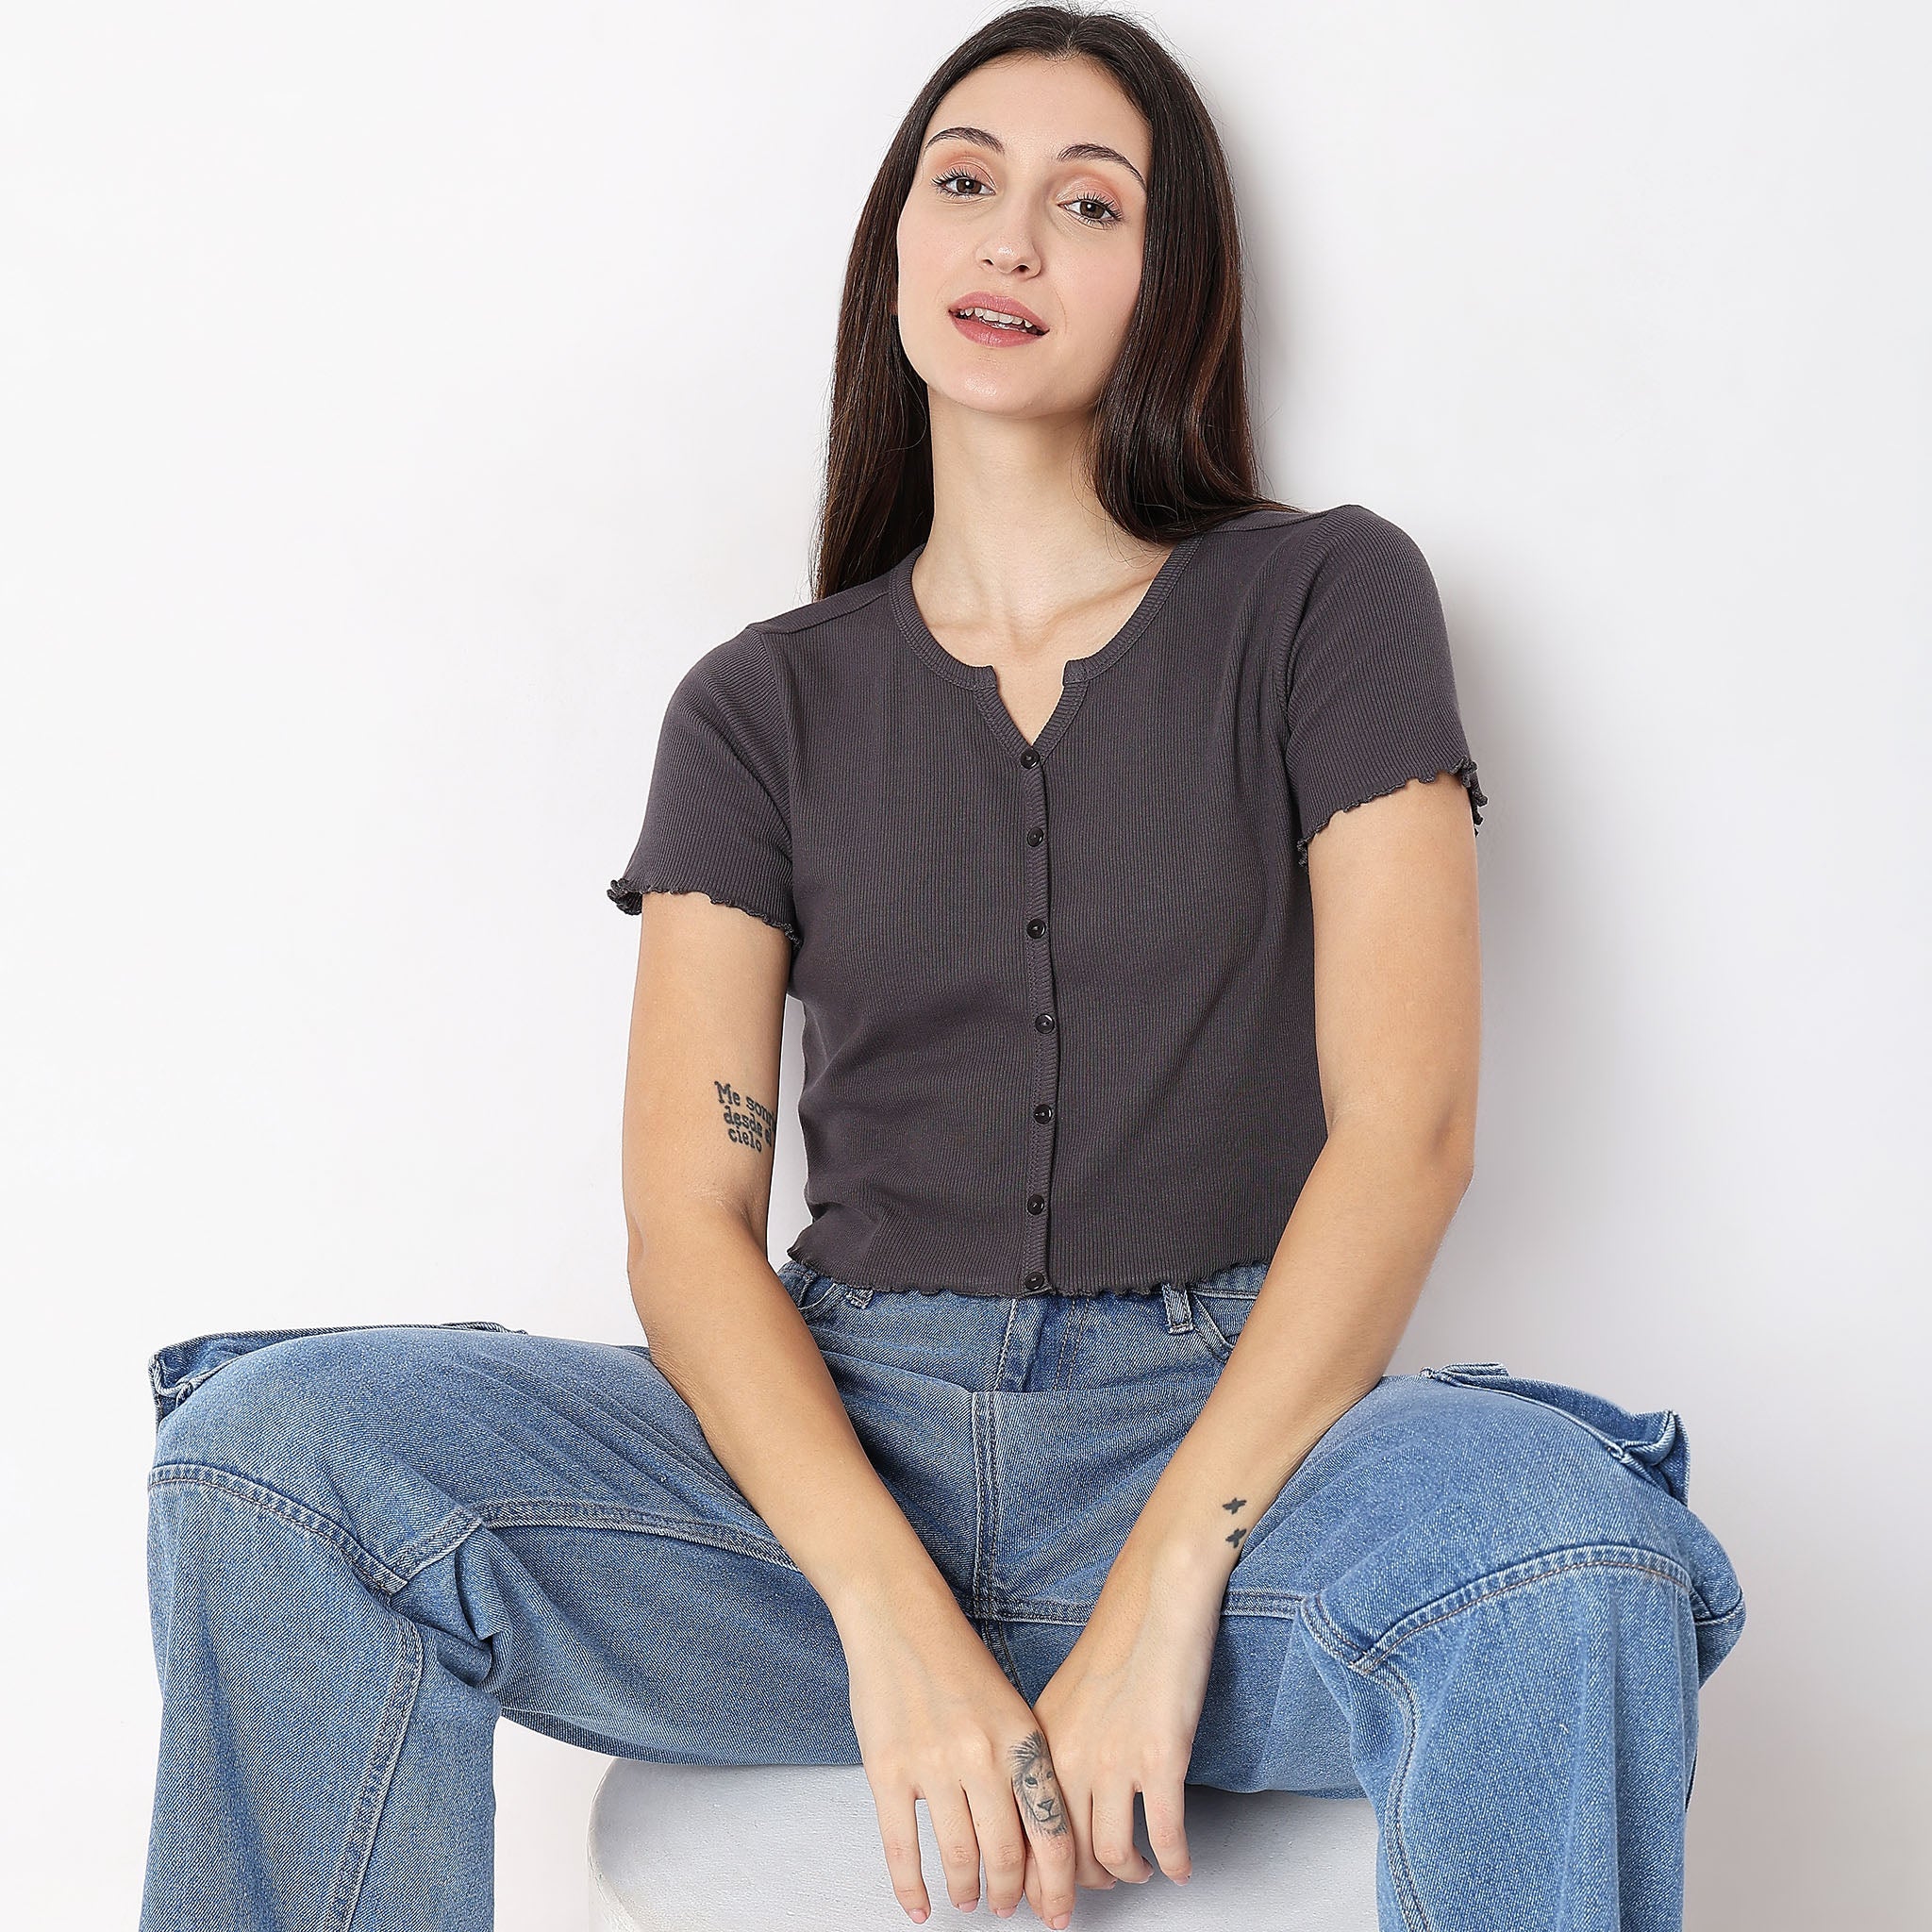 Women Wearing Relaxed Fit Solid T-Shirt